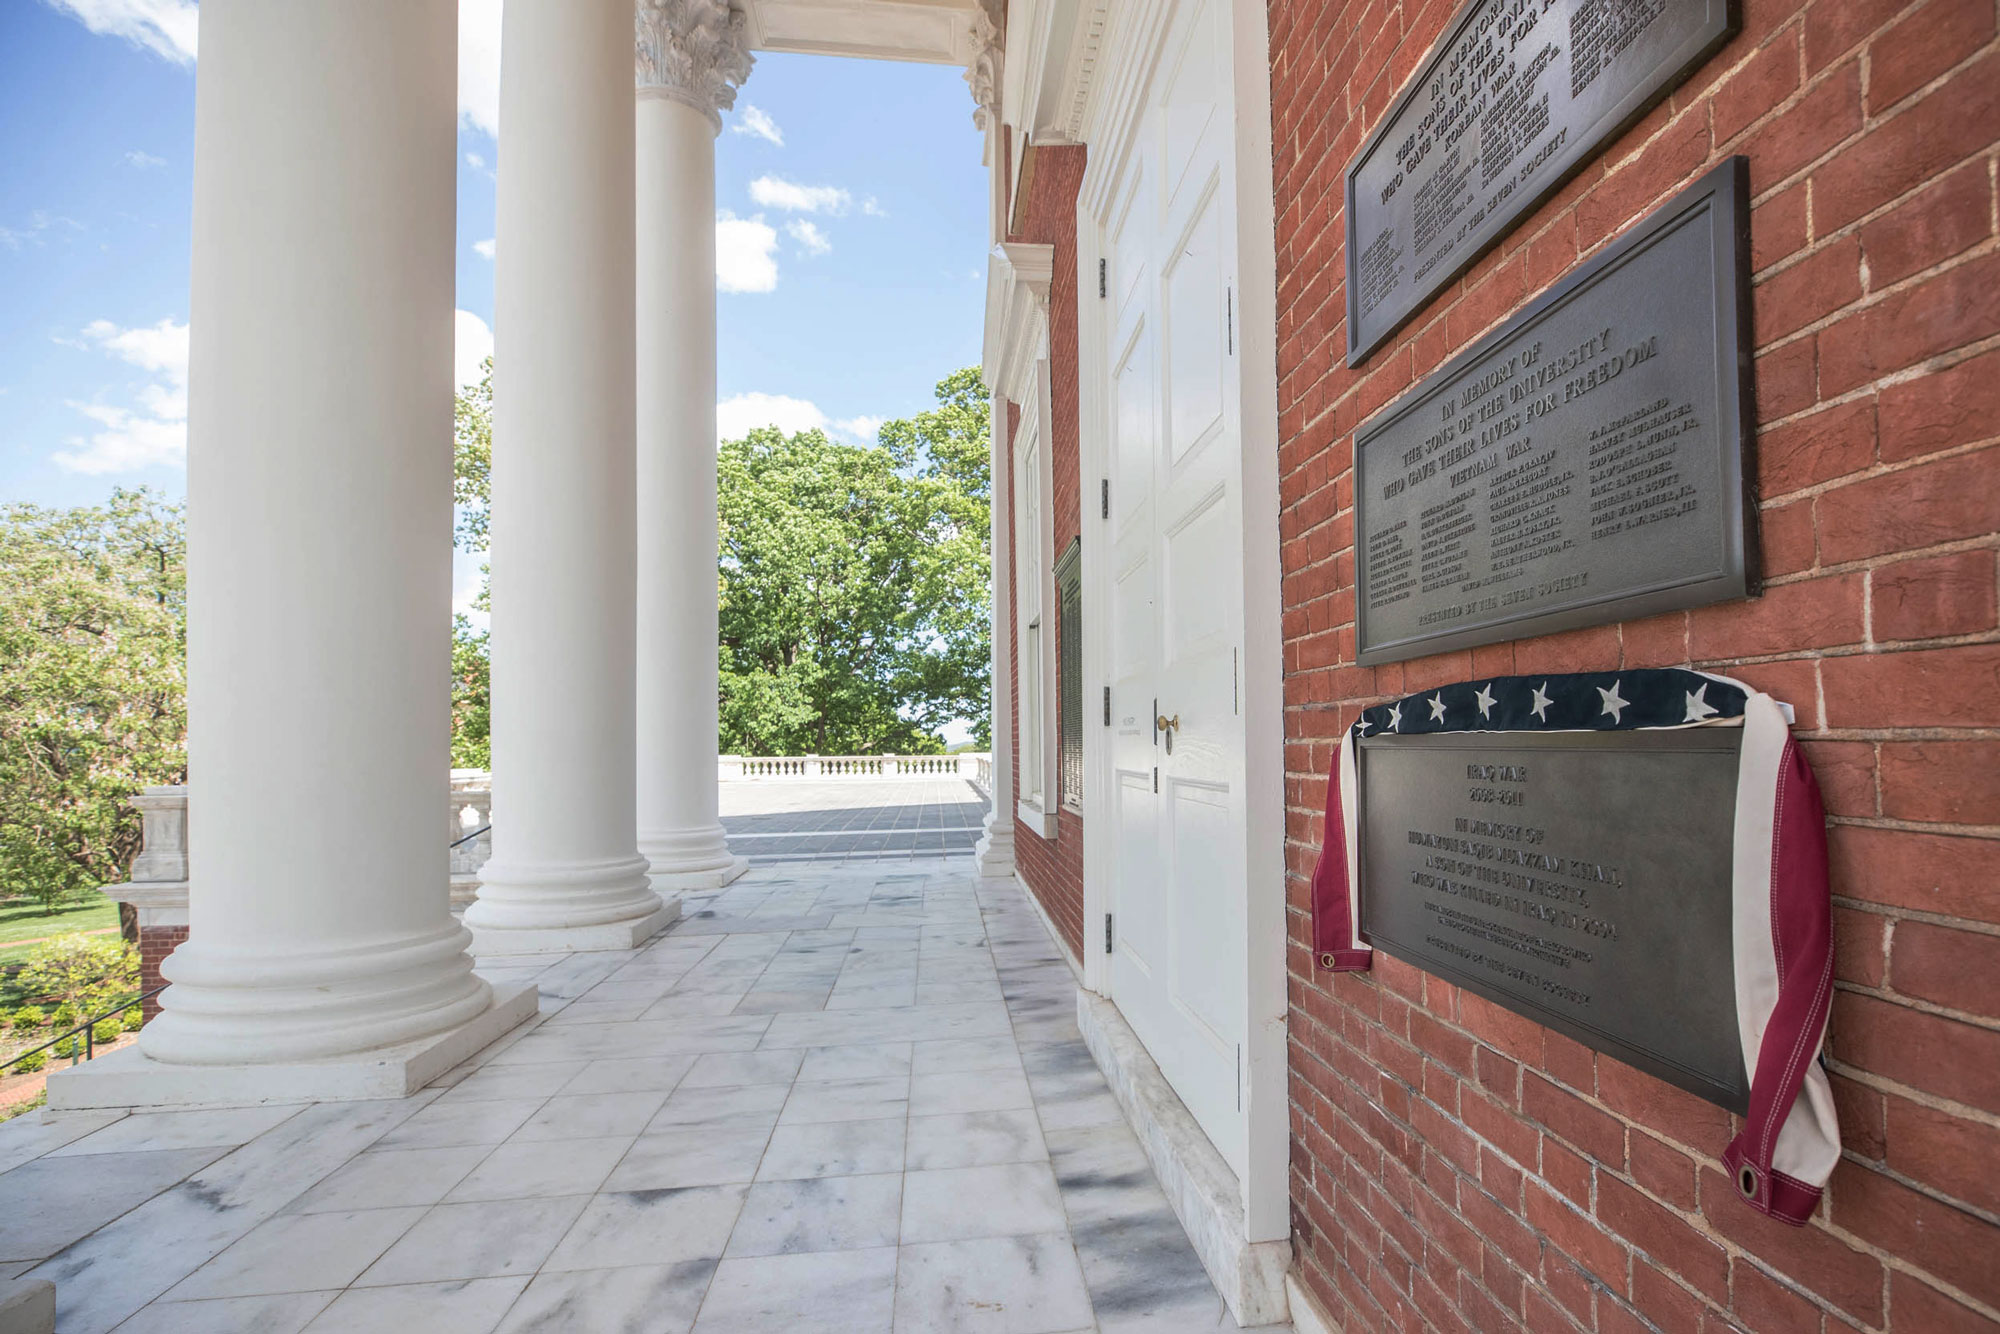 A new plaque mounted on the north wall of the Rotunda honors Capt. Humayun Khan, with an American Flag draped over it